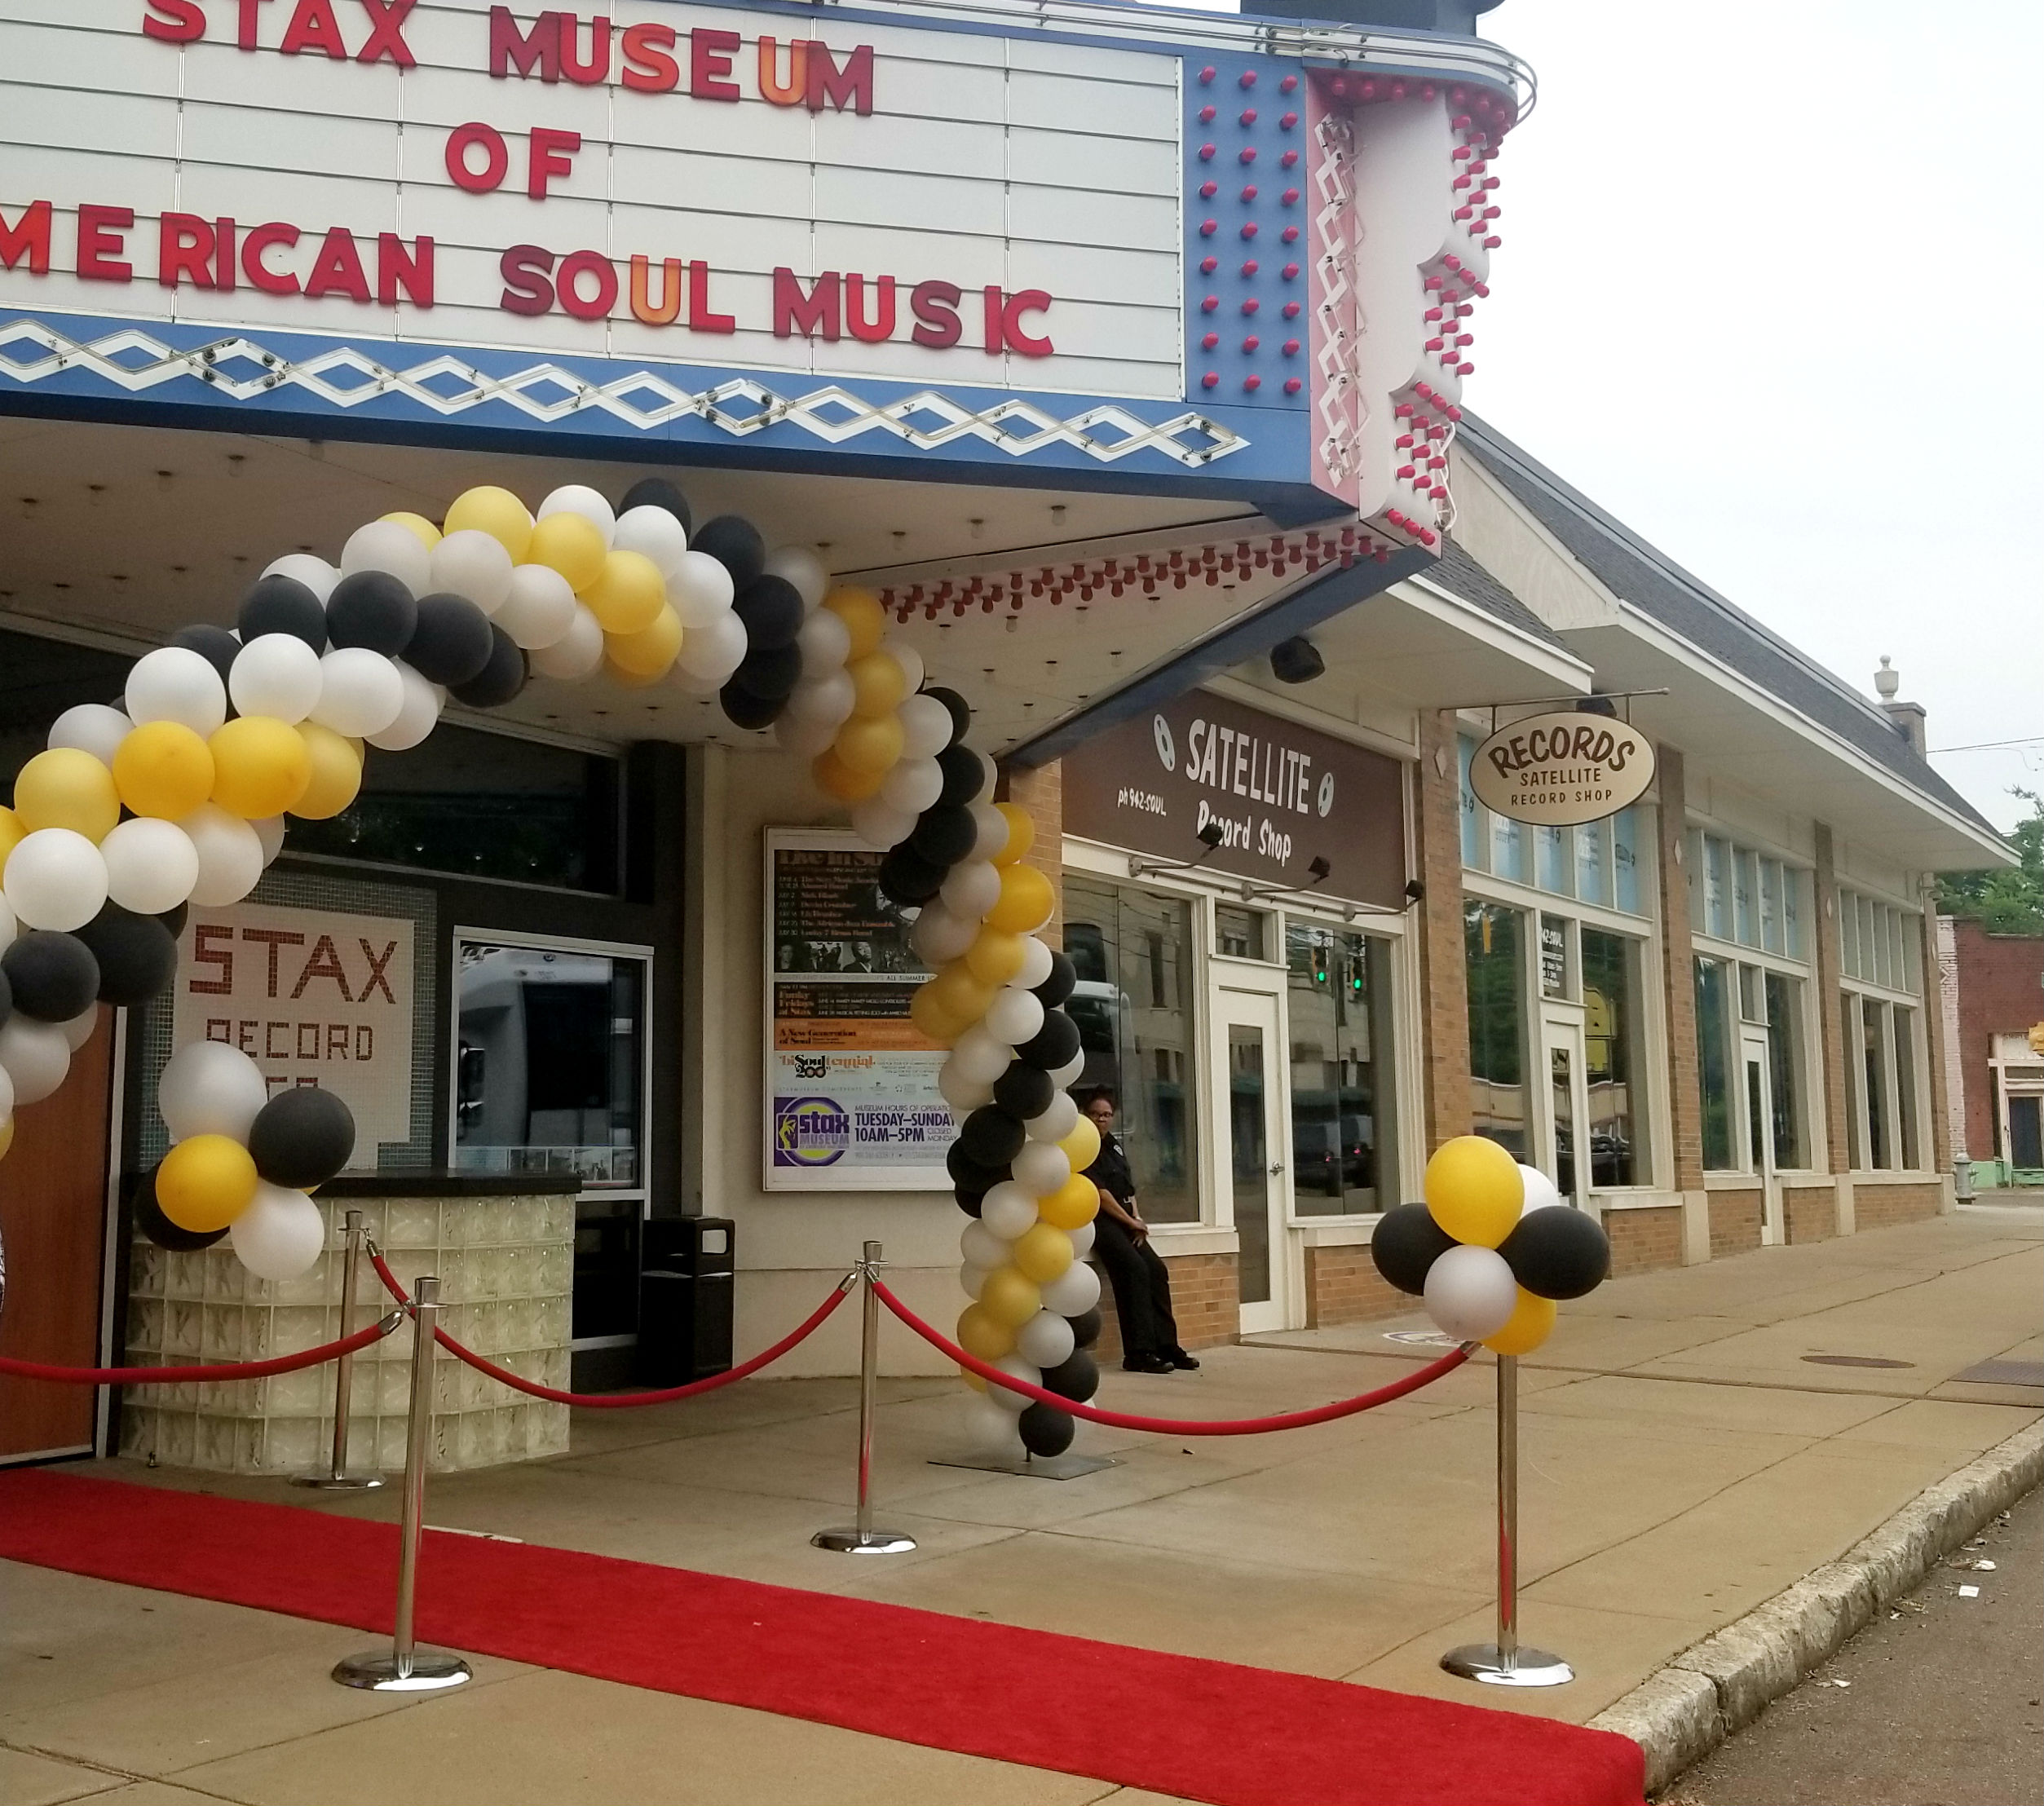 The Stax Museum of American Soul Music was decked out with balloon arches and a red carpet for Senior Prom, hosted by Shelby County Mayor Lee Harris. (Baris Gursakal)